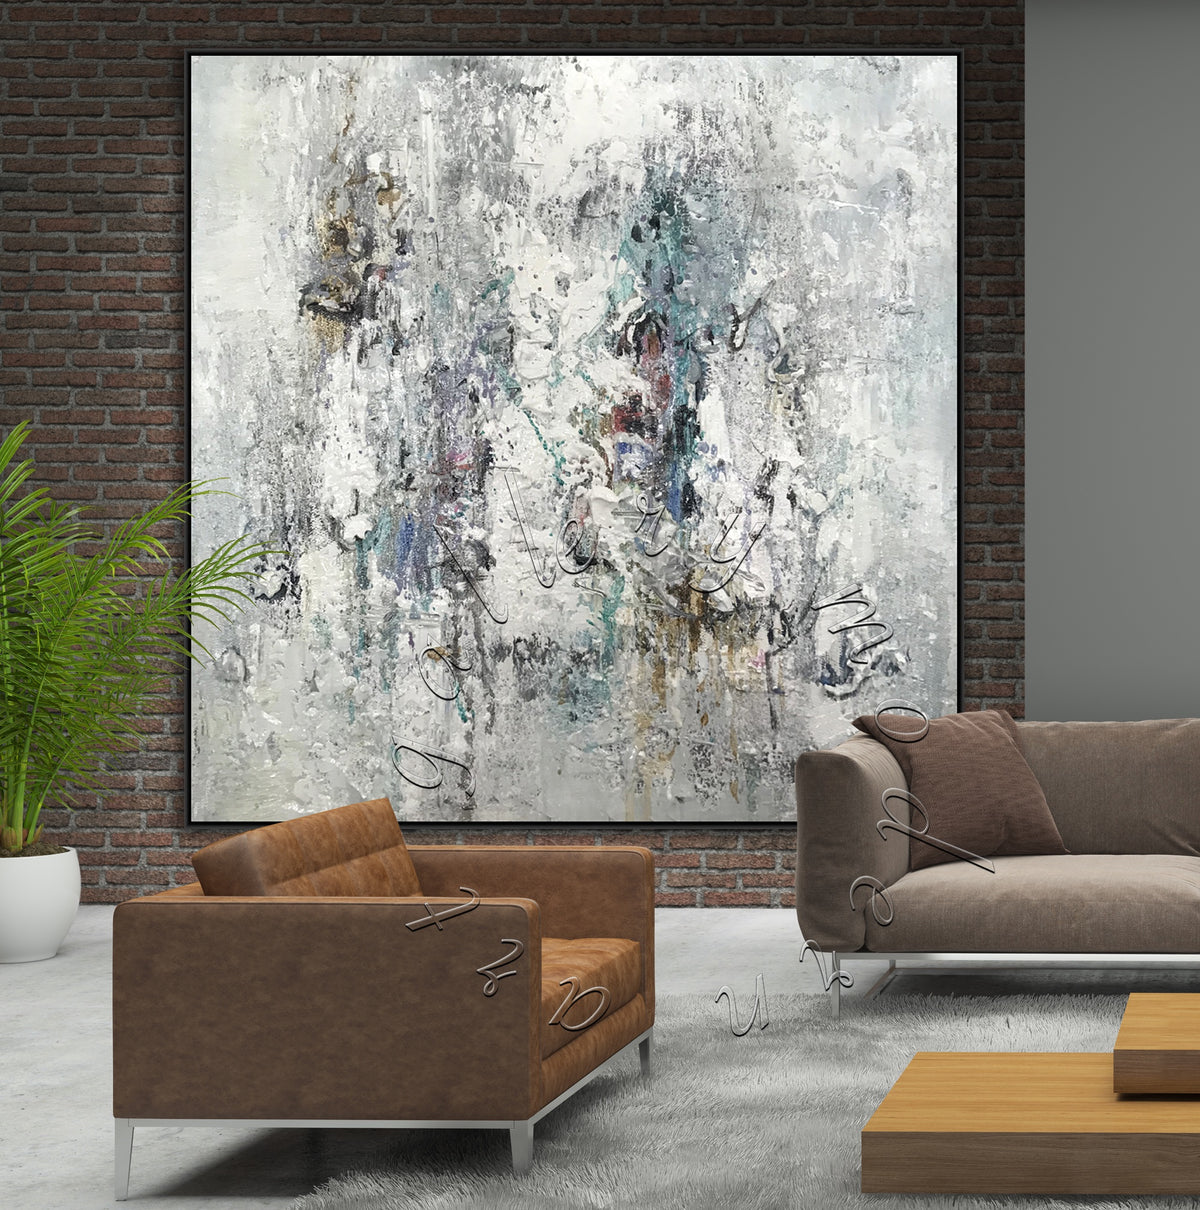 Soft Abstract Canvas Painting, Texture Original Painting, Square Wall Art